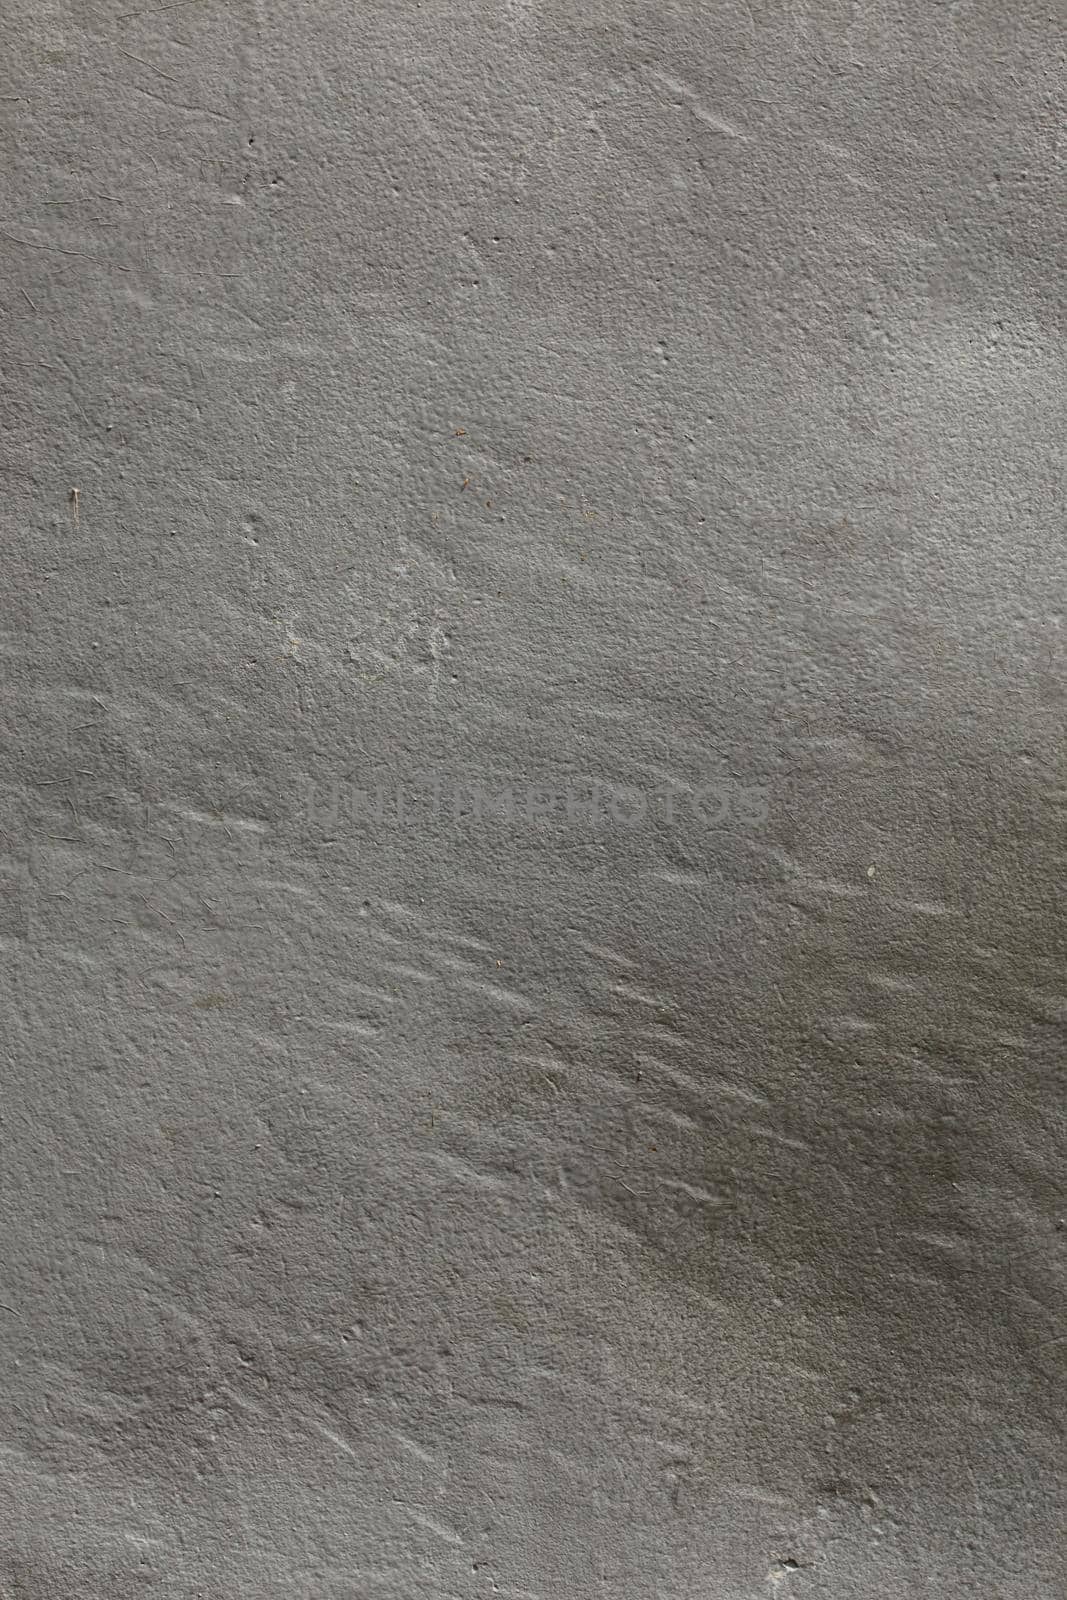 thick flat sheet metal grey paint surface texture and background by z1b